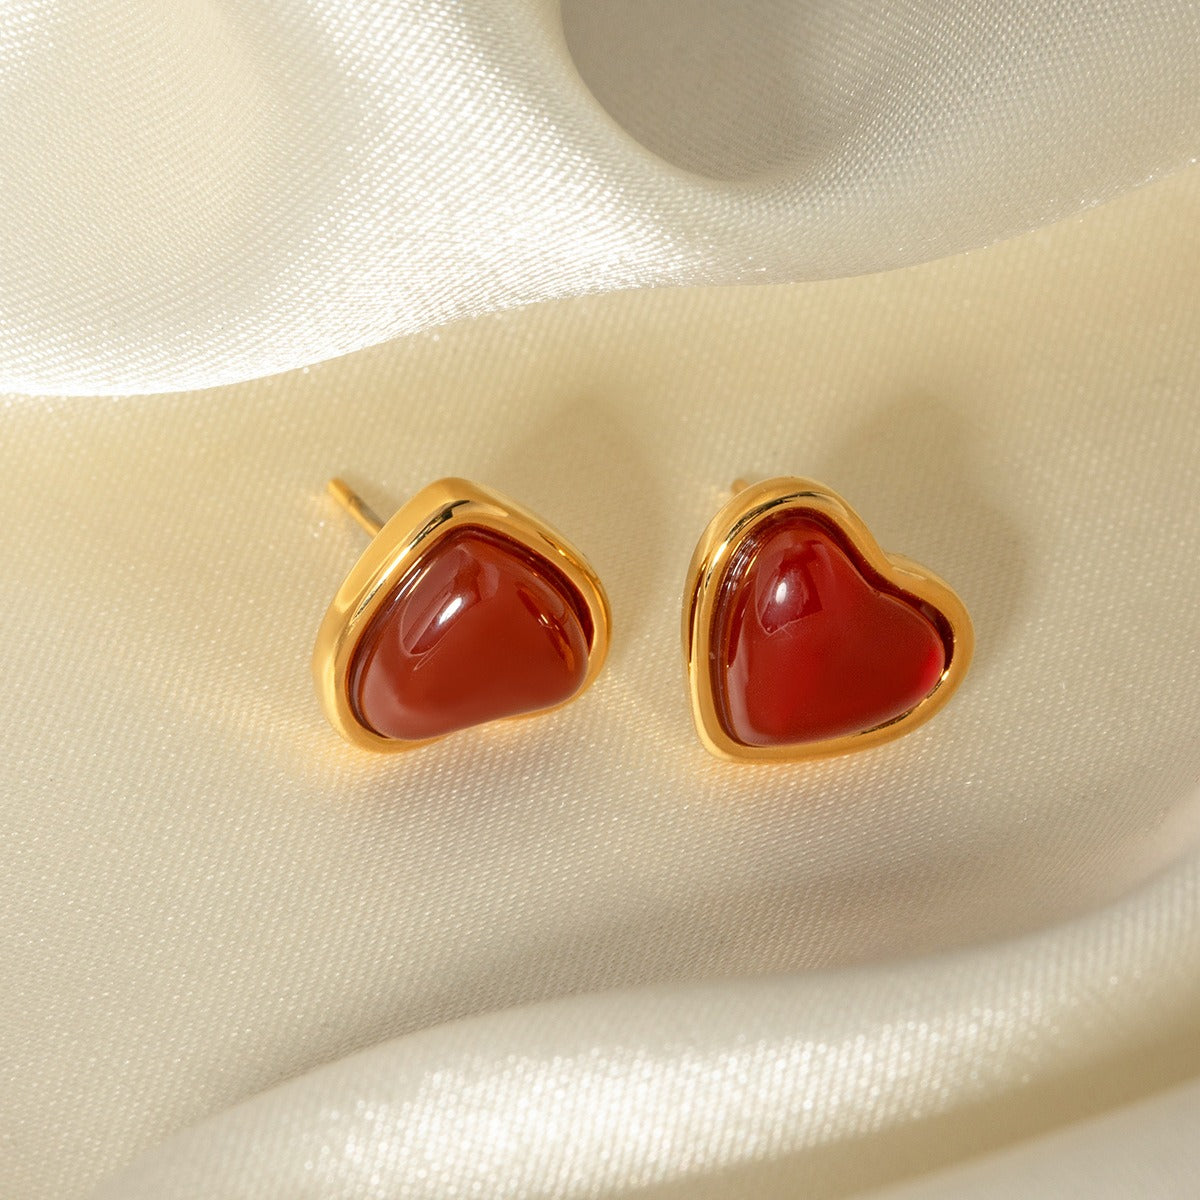 18k gold exquisite and elegant love inlaid red gemstone design earrings - SAOROPHO